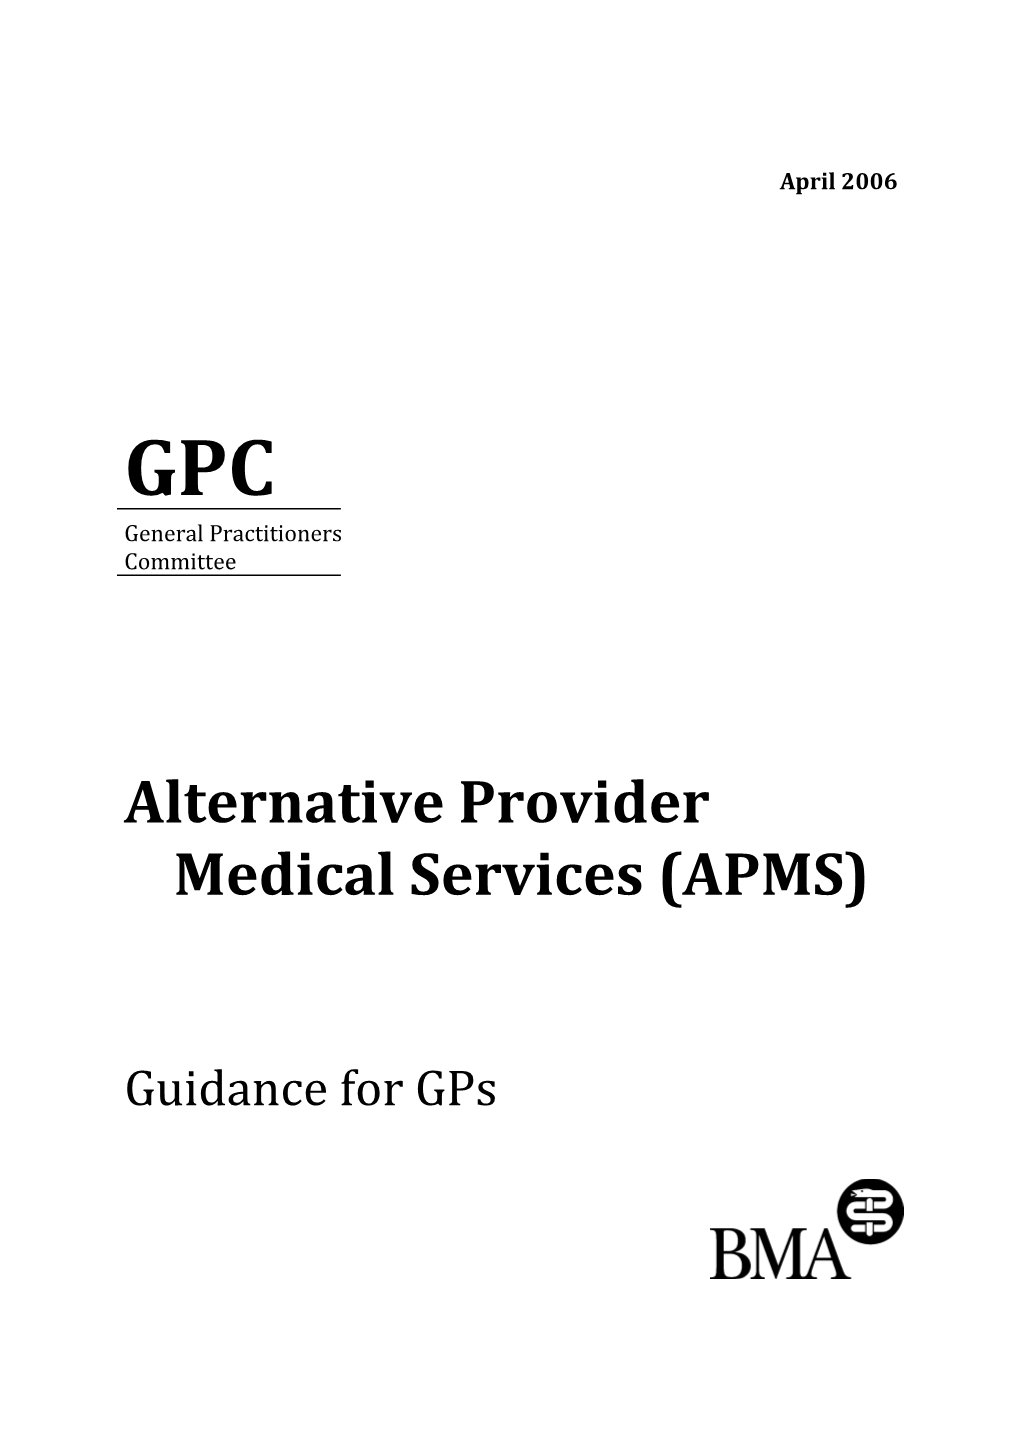 Alternative Providers of Medical Services (APMS) Guidance for Gps